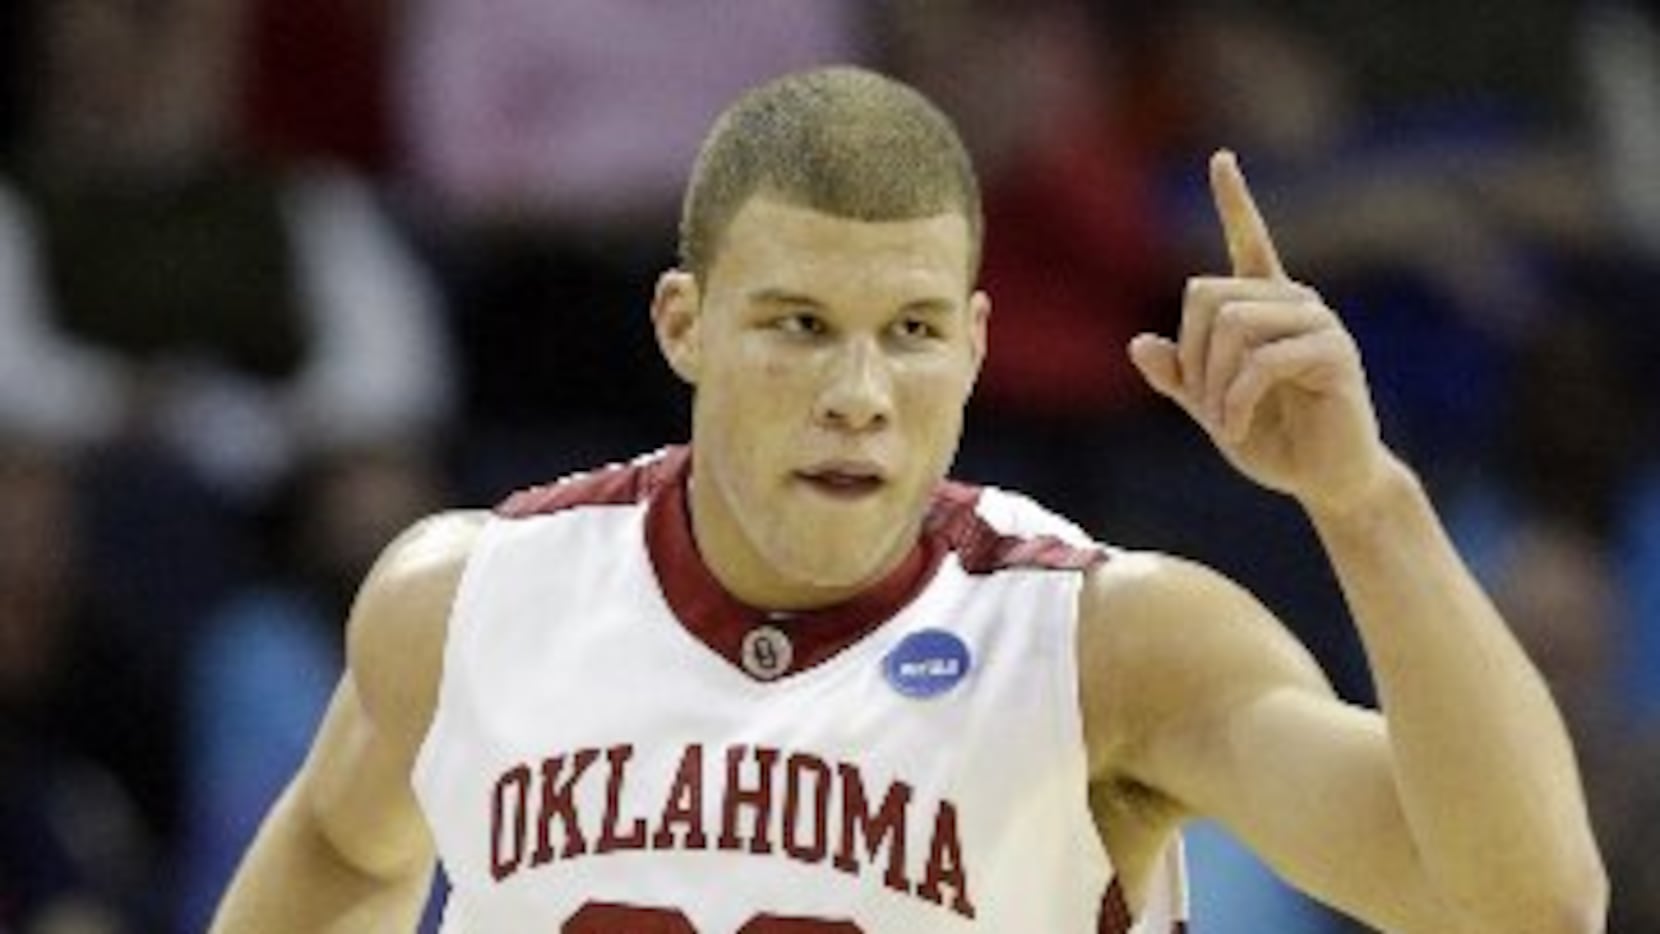 FILE - In this March 27, 2009 file photo, Oklahoma forward Blake Griffin (23) reacts during...